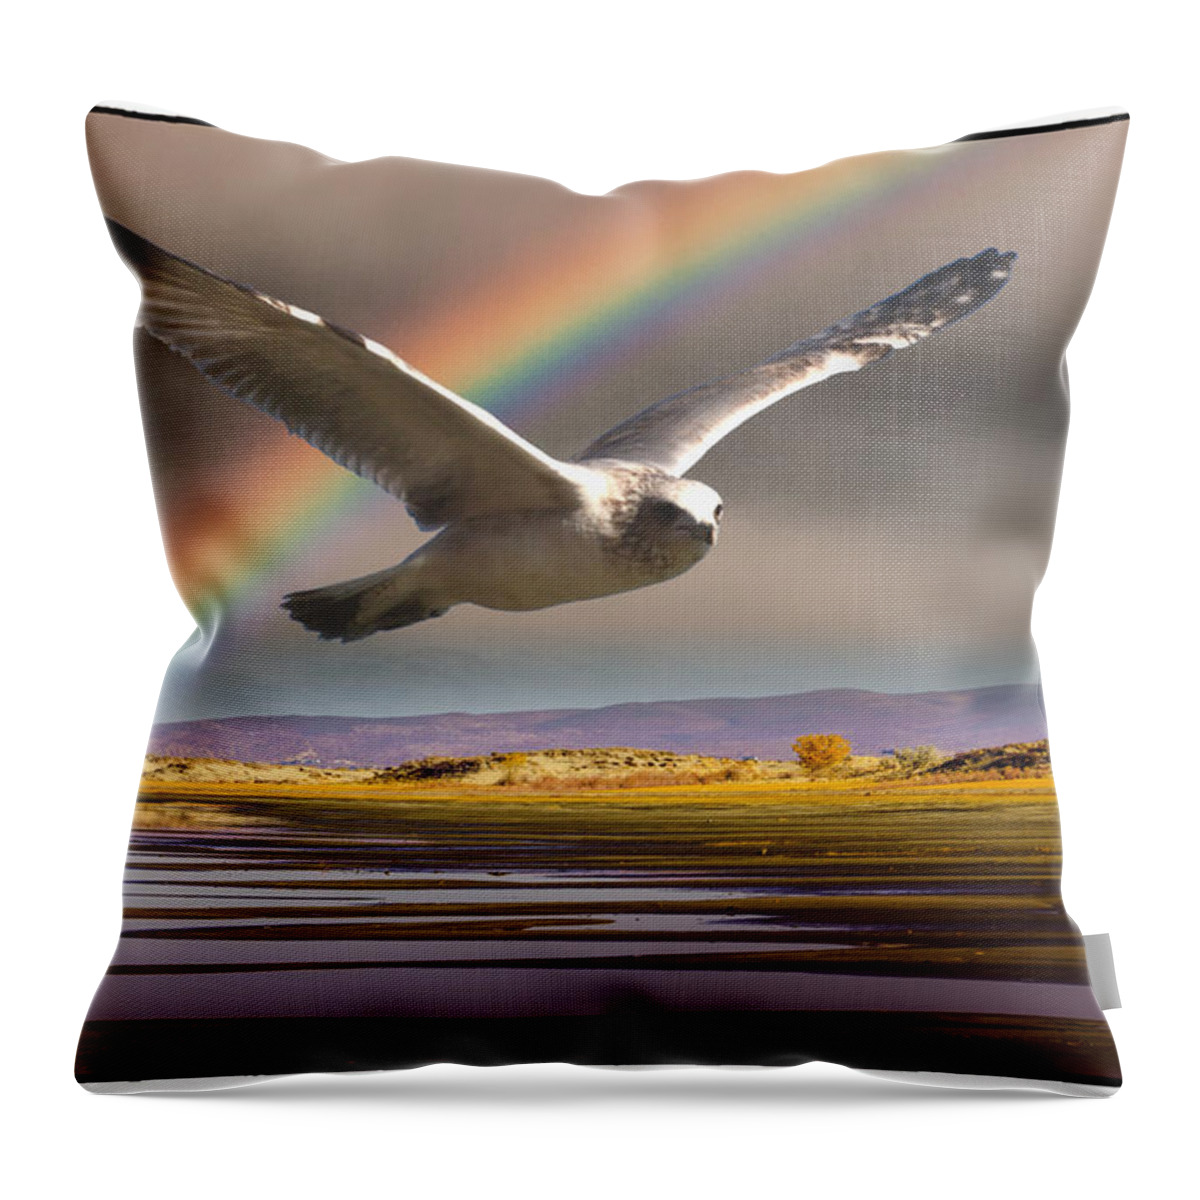 Gull Throw Pillow featuring the photograph The Gull and the Rainbow by Janis Knight